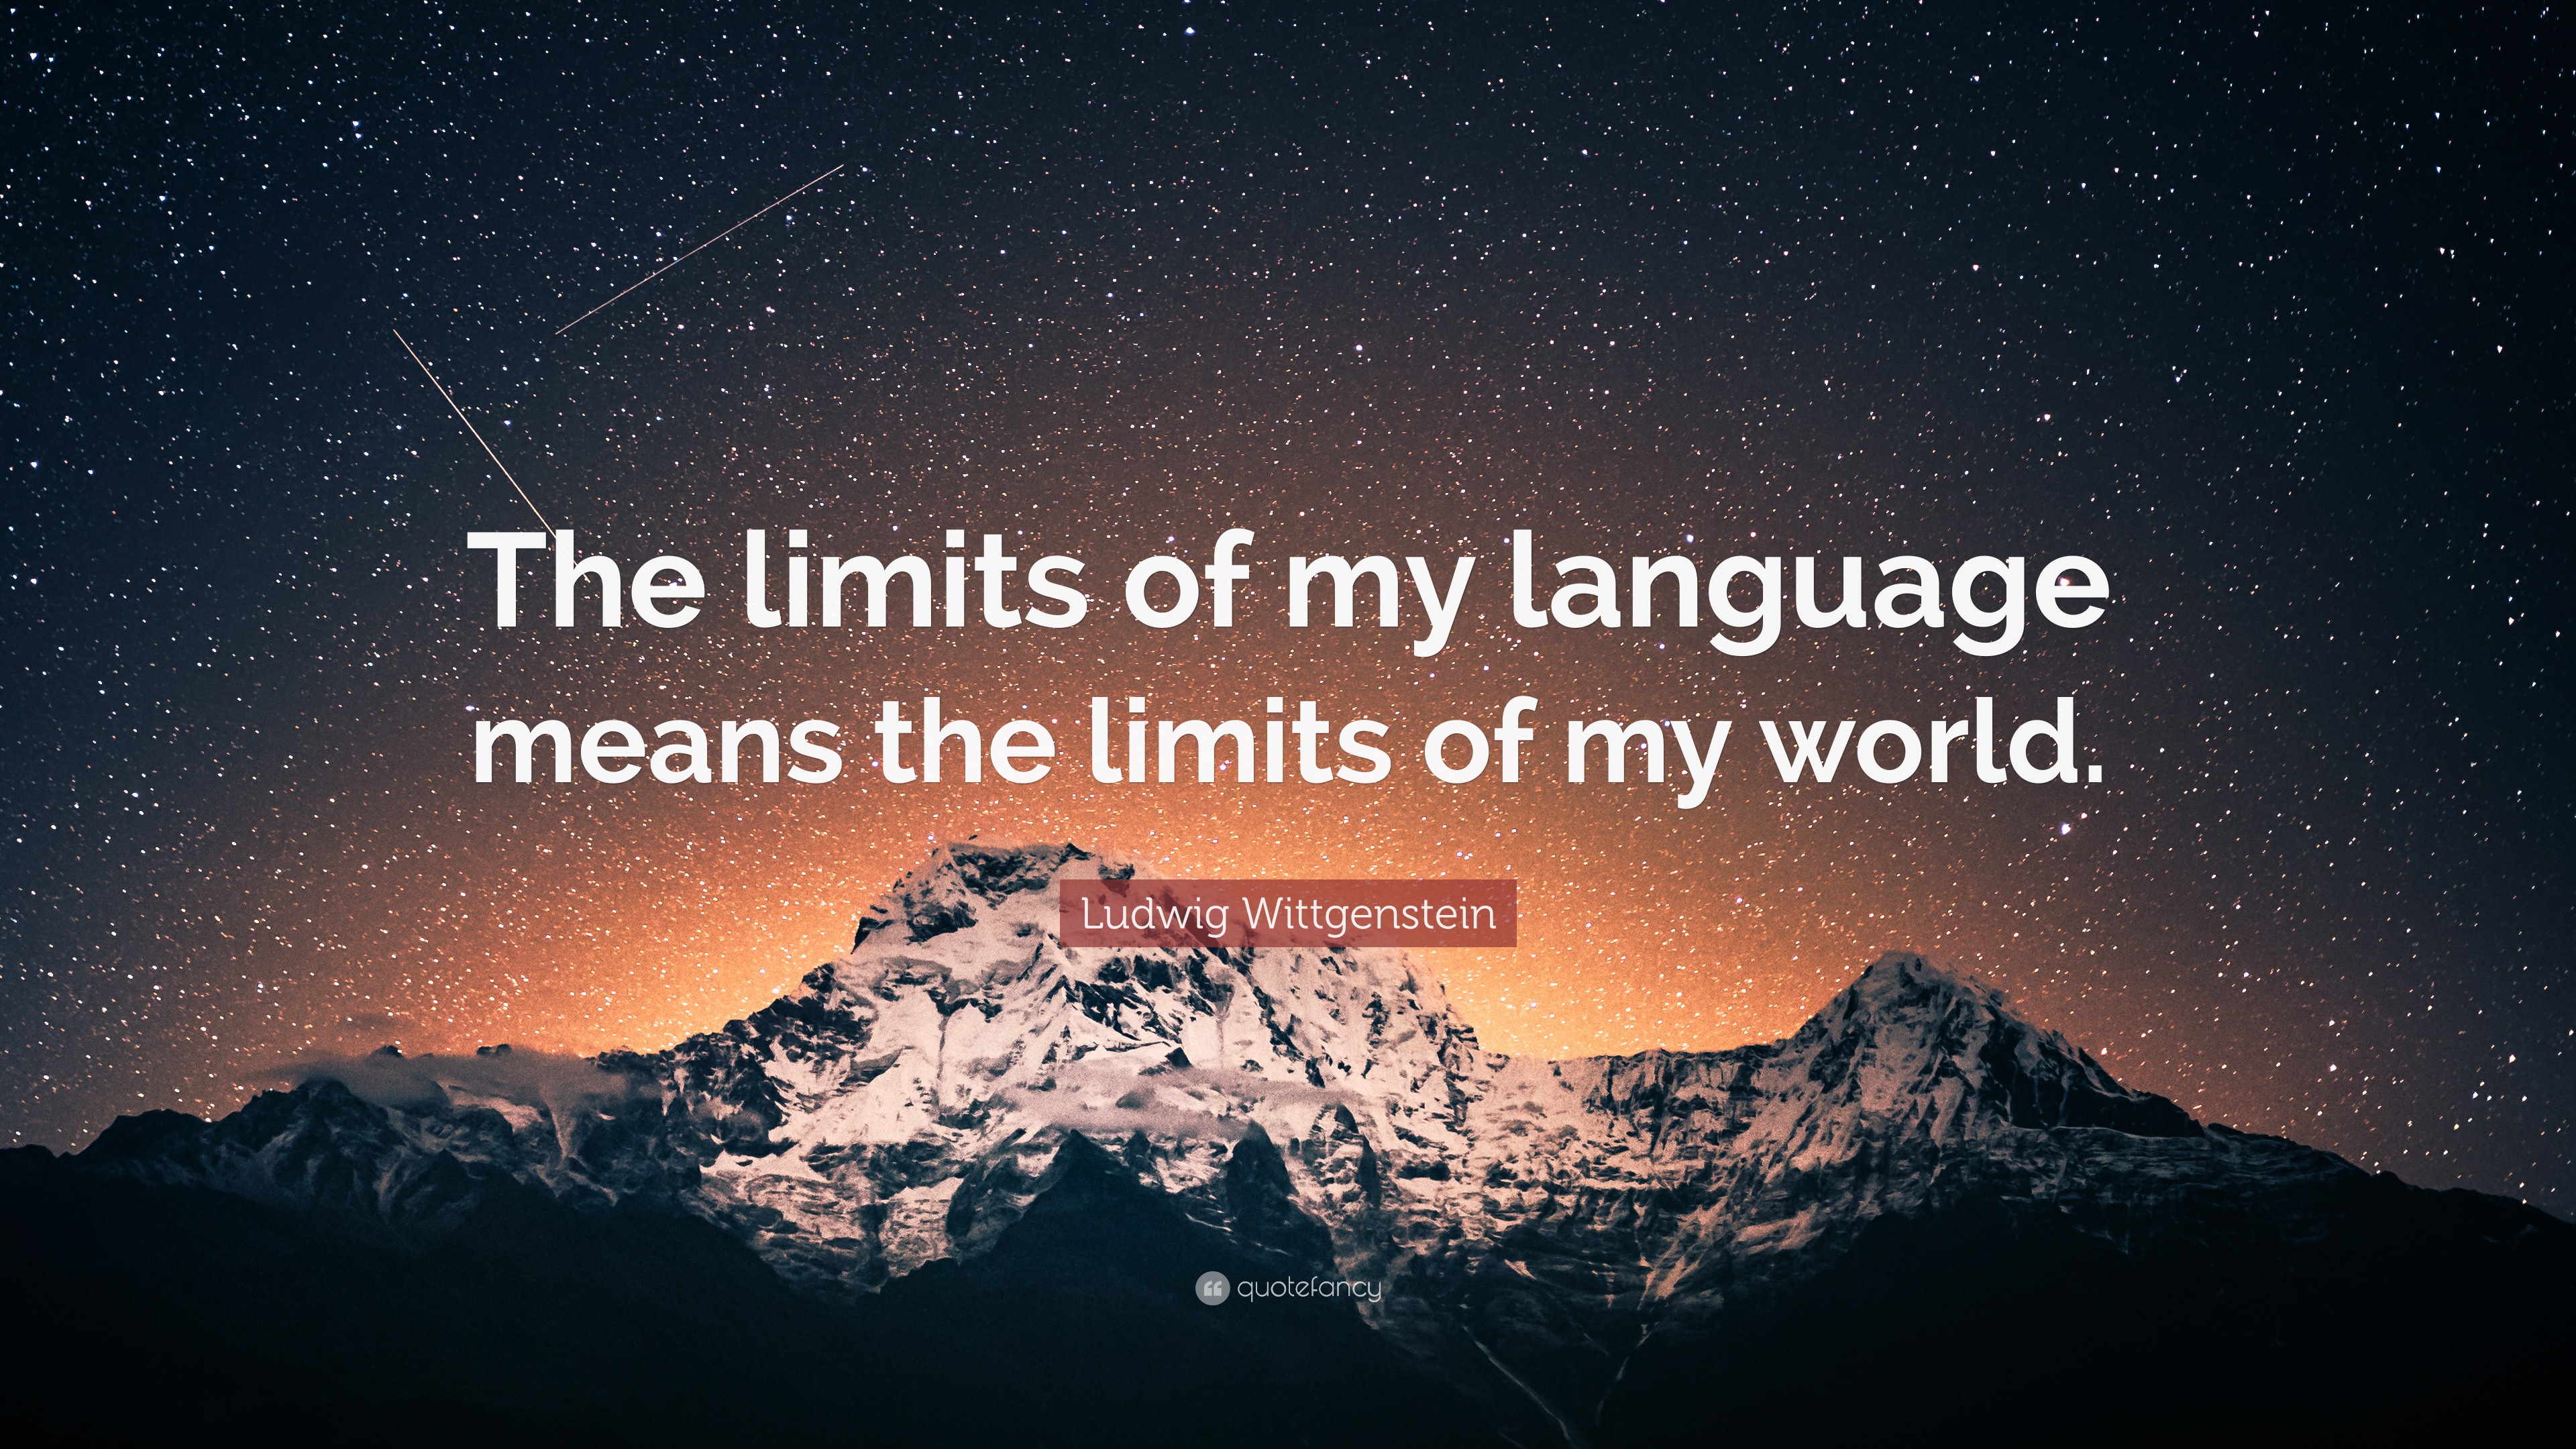 Ludwig Wittgenstein Quote: “The limits of my language means the limits